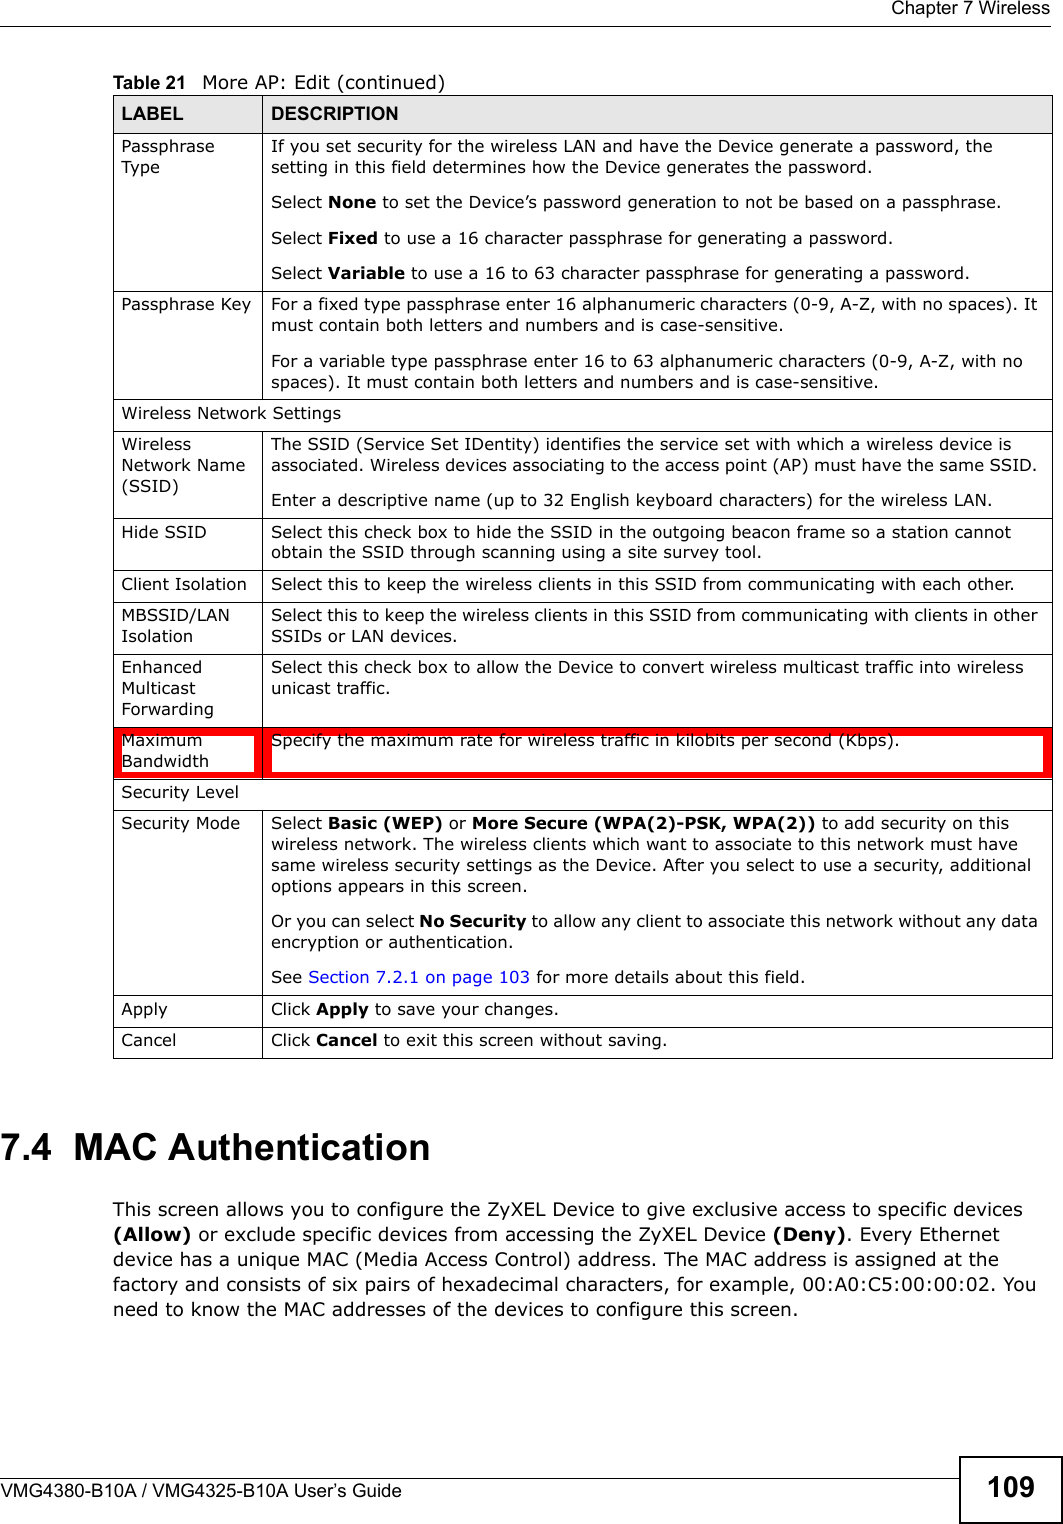  Chapter 7 WirelessVMG4380-B10A / VMG4325-B10A User’s Guide 1097.4  MAC Authentication    This screen allows you to configure the ZyXEL Device to give exclusive access to specific devices (Allow) or exclude specific devices from accessing the ZyXEL Device (Deny). Every Ethernet device has a unique MAC (Media Access Control) address. The MAC address is assigned at the factory and consists of six pairs of hexadecimal characters, for example, 00:A0:C5:00:00:02. You need to know the MAC addresses of the devices to configure this screen.Passphrase TypeIf you set security for the wireless LAN and have the Device generate a password, the setting in this field determines how the Device generates the password.Select None to set the Device’s password generation to not be based on a passphrase. Select Fixed to use a 16 character passphrase for generating a password.Select Variable to use a 16 to 63 character passphrase for generating a password.Passphrase Key For a fixed type passphrase enter 16 alphanumeric characters (0-9, A-Z, with no spaces). Itmust contain both letters and numbers and is case-sensitive.For a variable type passphrase enter 16 to 63 alphanumeric characters (0-9, A-Z, with nospaces). It must contain both letters and numbers and is case-sensitive.Wireless Network SettingsWirelessNetwork Name (SSID)The SSID (Service Set IDentity) identifies the service set with which a wireless device isassociated. Wireless devices associating to the access point (AP) must have the same SSID. Enter a descriptive name (up to 32 English keyboard characters) for the wireless LAN.Hide SSID Select this check box to hide the SSID in the outgoing beacon frame so a station cannot obtain the SSID through scanning using a site survey tool.Client Isolation  Select this to keep the wireless clients in this SSID from communicating with each other.MBSSID/LANIsolation Select this to keep the wireless clients in this SSID from communicating with clients in otherSSIDs or LAN devices.EnhancedMulticastForwardingSelect this check box to allow the Device to convert wireless multicast traffic into wireless unicast traffic.Maximum BandwidthSpecify the maximum rate for wireless traffic in kilobits per second (Kbps).Security LevelSecurity Mode Select Basic (WEP) or More Secure (WPA(2)-PSK, WPA(2)) to add security on this wireless network. The wireless clients which want to associate to this network must have same wireless security settings as the Device. After you select to use a security, additionaloptions appears in this screen.  Or you can select No Security to allow any client to associate this network without any dataencryption or authentication.See Section 7.2.1 on page 103 for more details about this field.Apply Click Apply to save your changes.Cancel Click Cancel to exit this screen without saving.Table 21   More AP: Edit (continued)LABEL DESCRIPTION